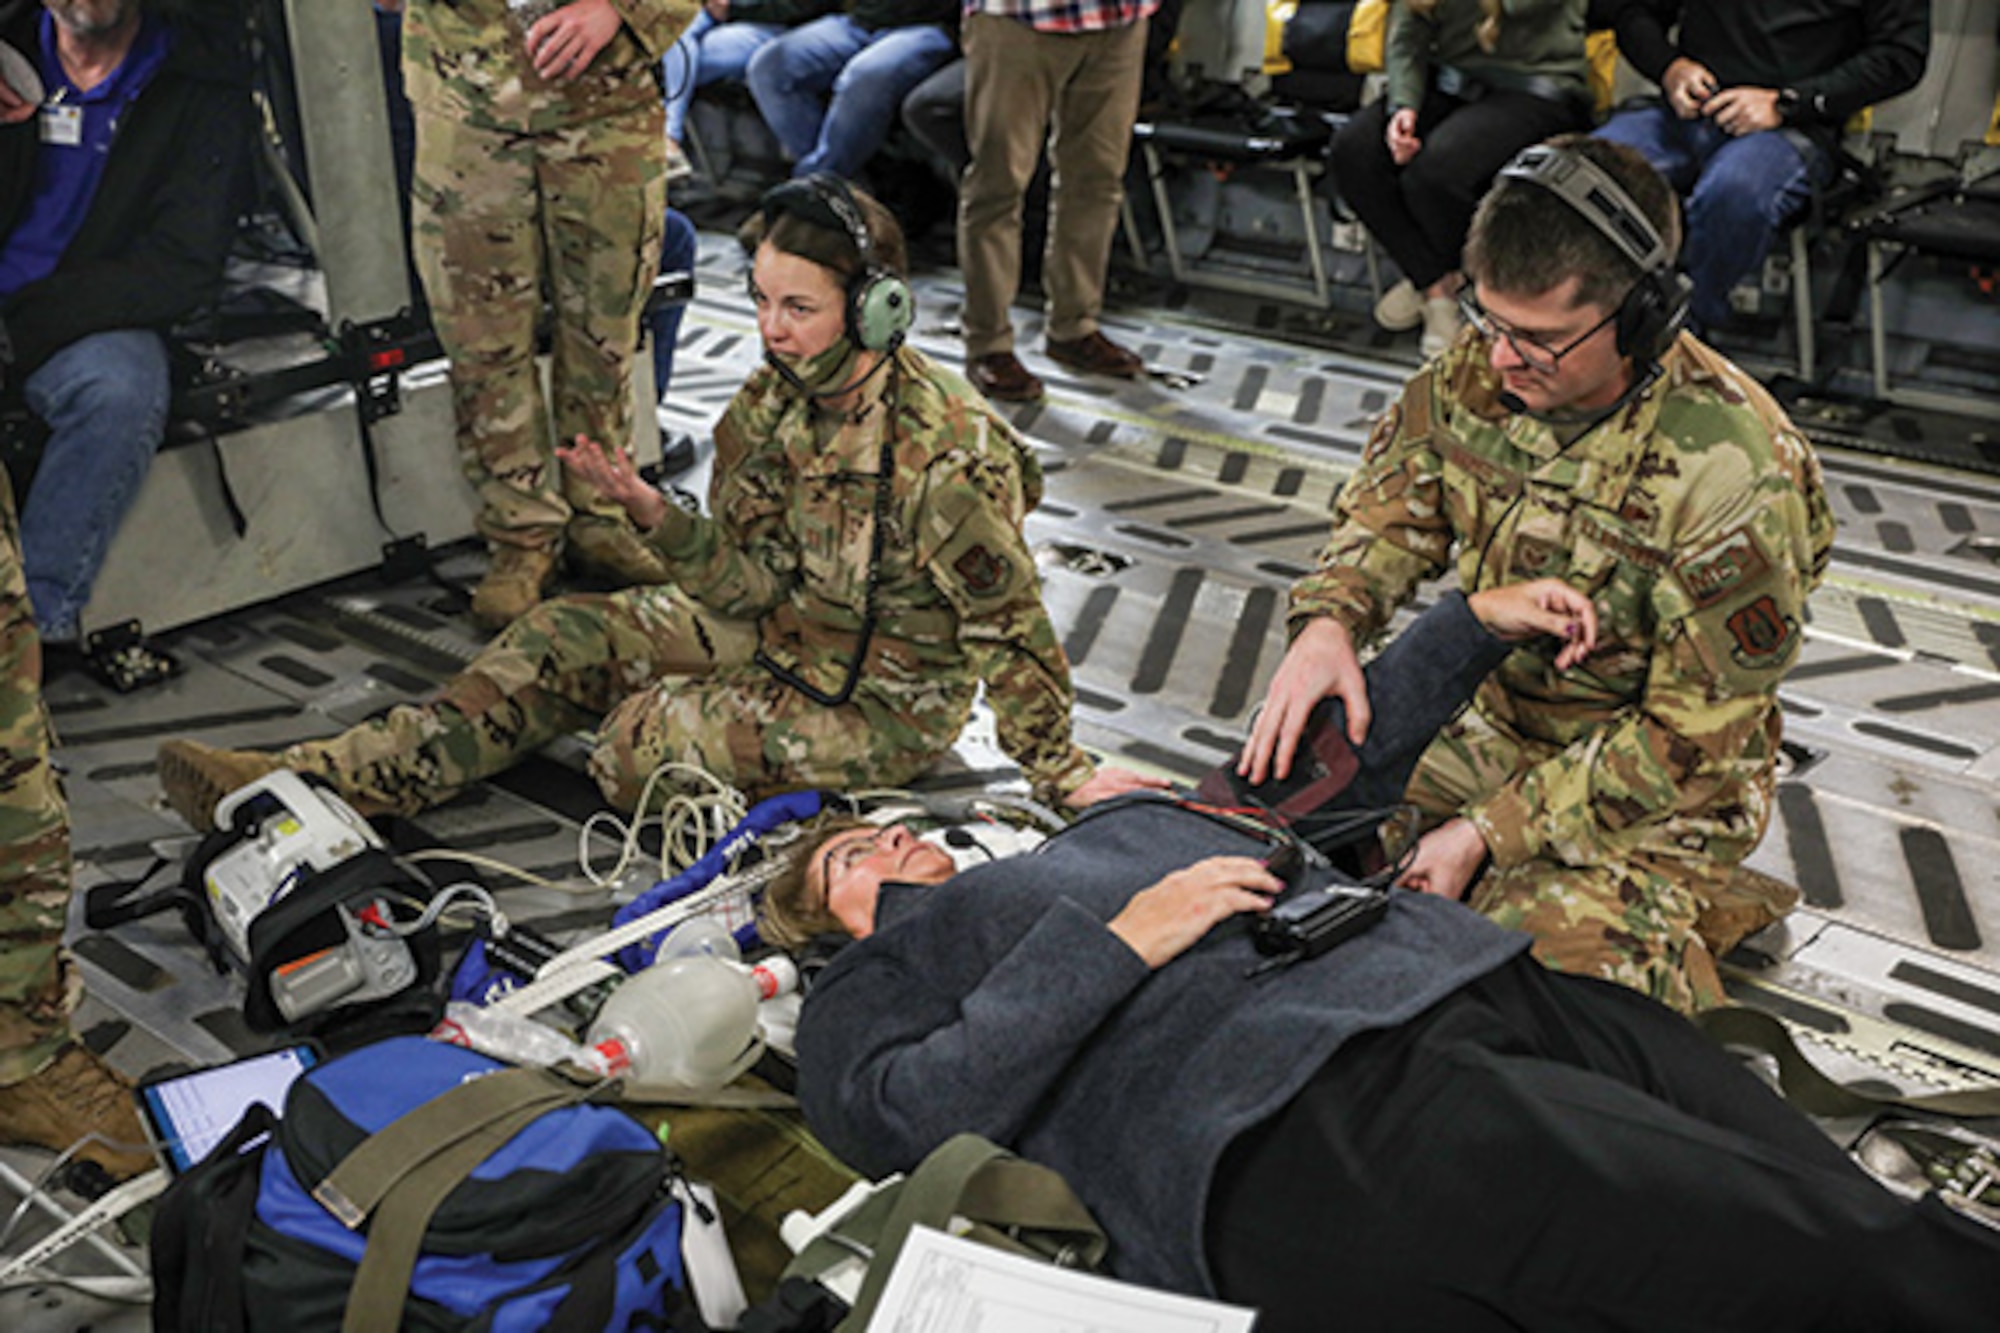 Capt. Emily Perkins, 445th Aeromedical Evacuation Squadron flight nurse and Staff Sgt. Trey Naber, 445th AES technician, demonstrate critical life saving techniques using an employer to role play a patient, during the Bosslift flight onboard a C-17 Globemaster III Nov. 5, 2022. (U.S. Air Force photo/Senior Airman Angela Jackson)